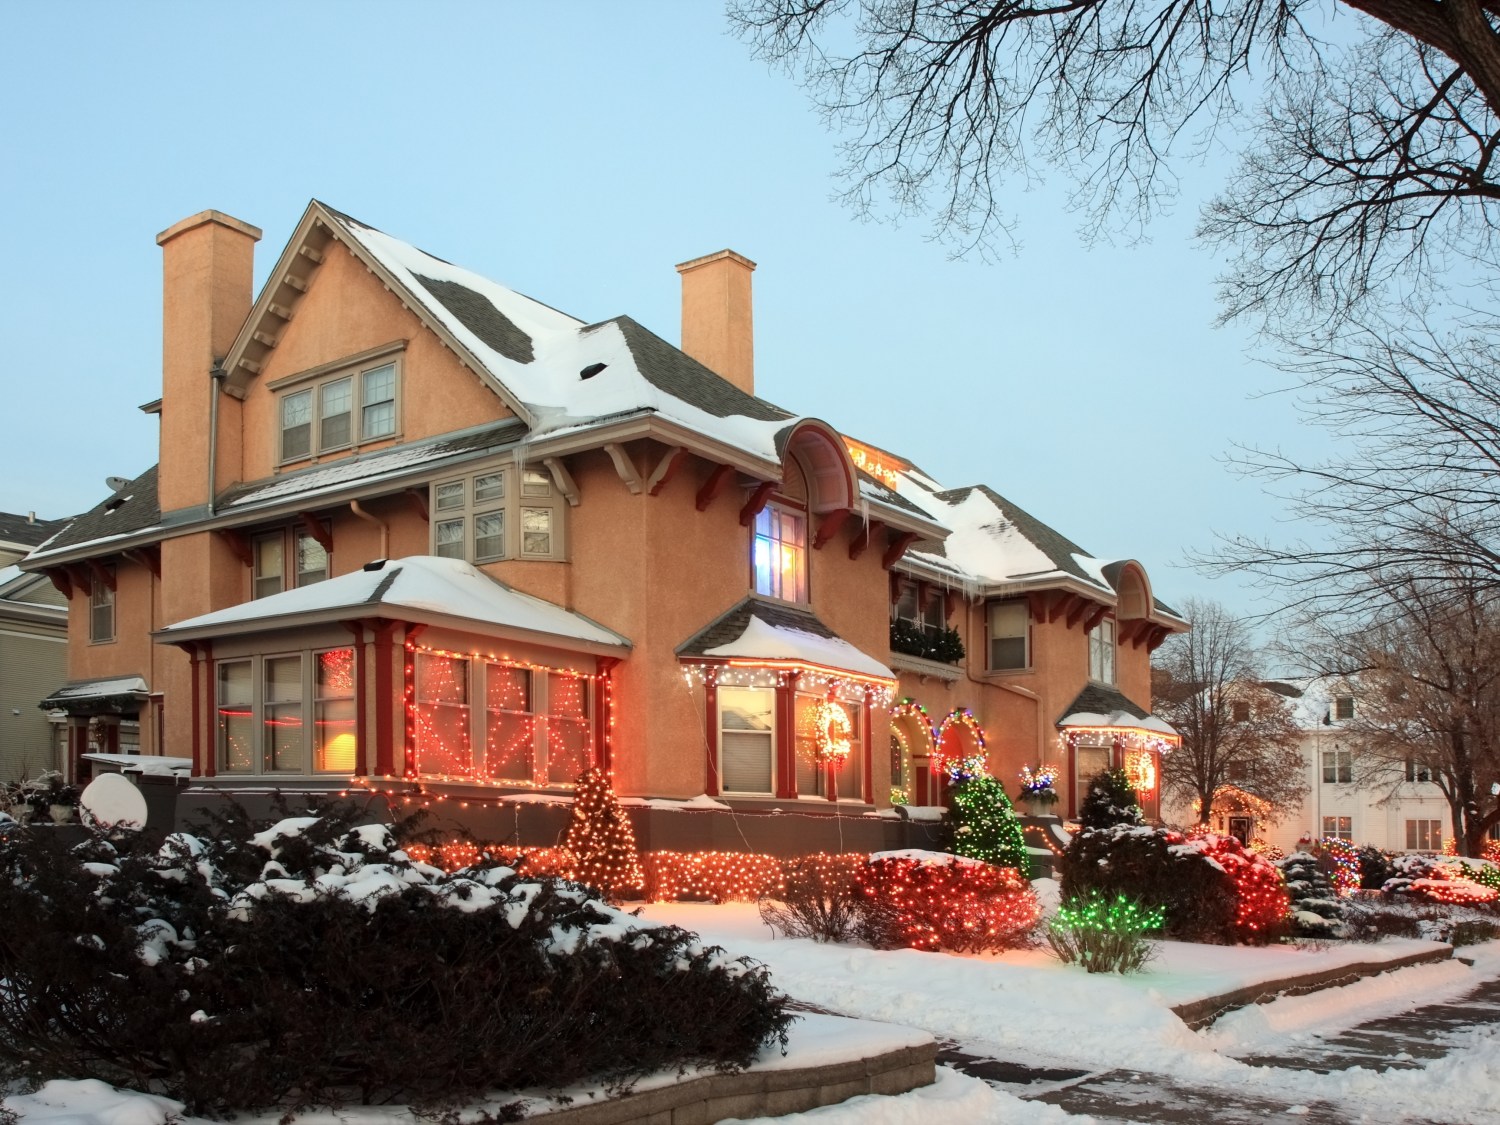 House in Minneapolis with Christmas lights - Image